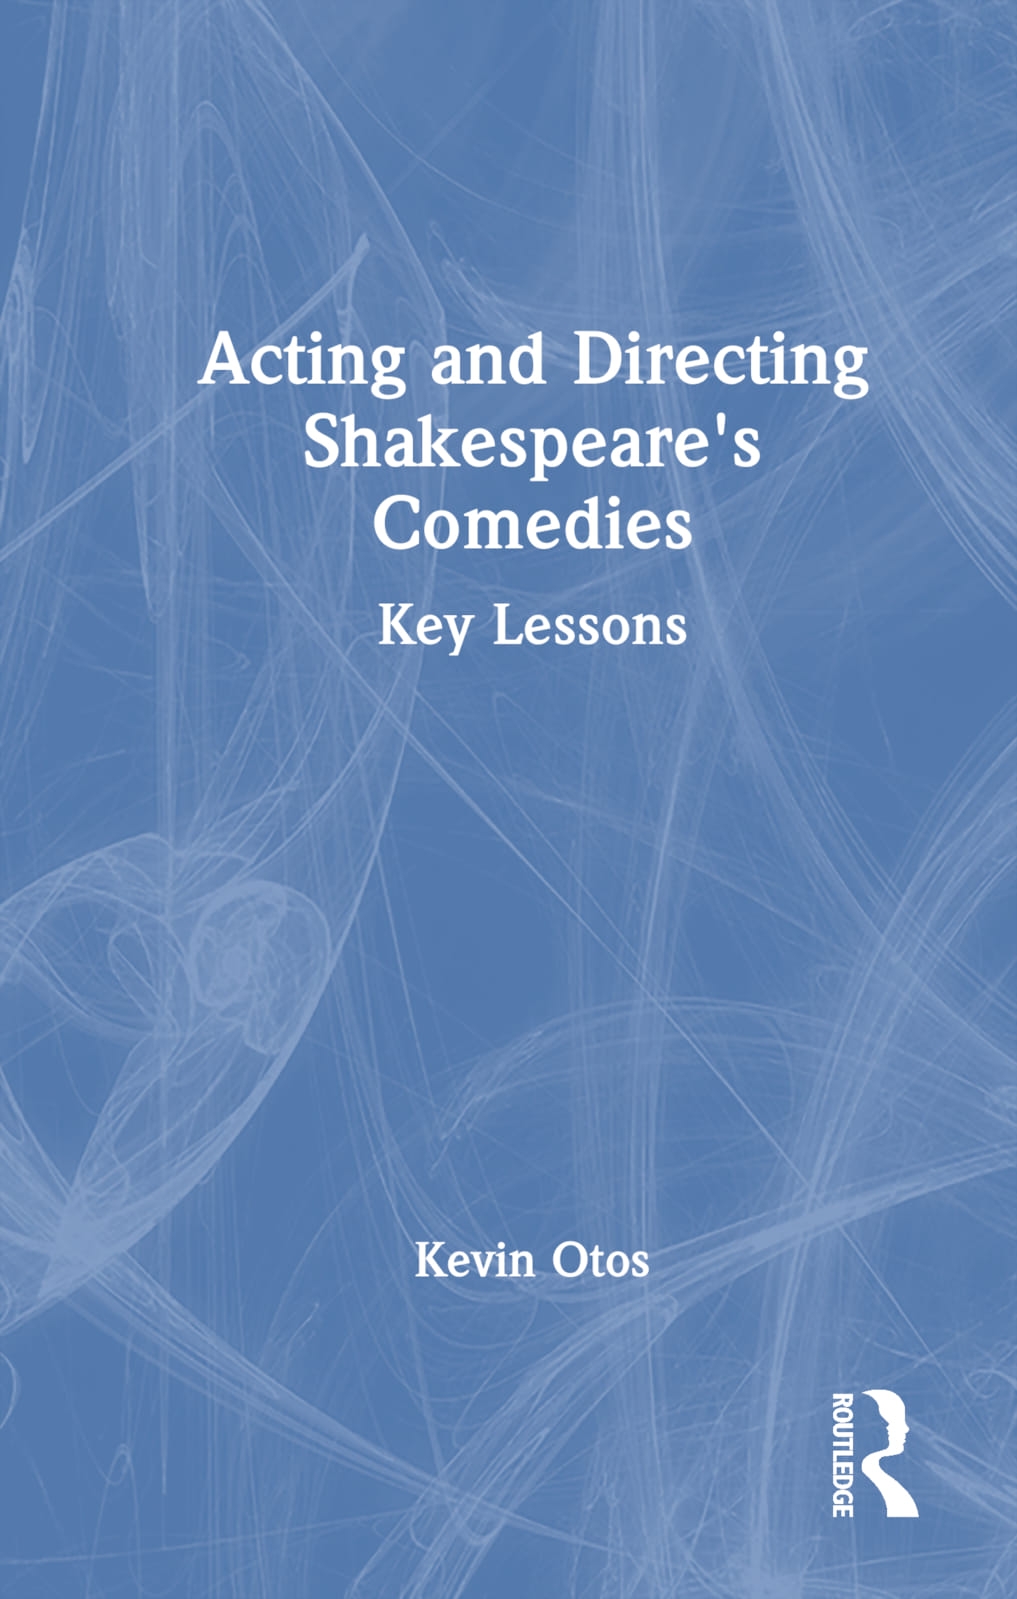 Acting and Directing Shakespeare’s Comedies: Key Lessons